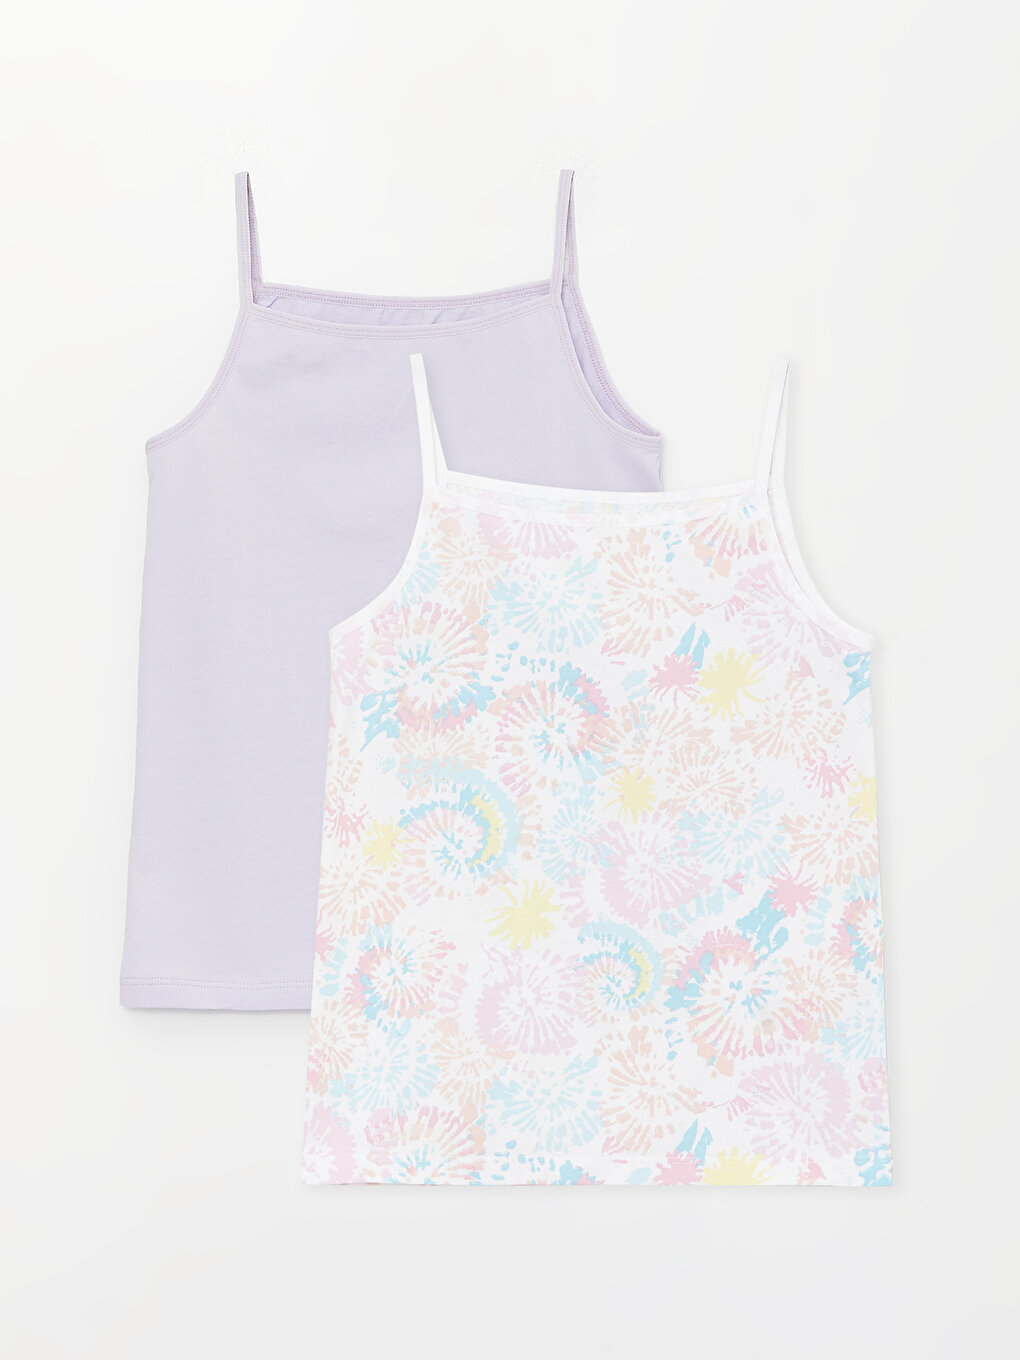 Square Neck Printed Girl's Undershirt, 2-pack -S45812Z4-G7S